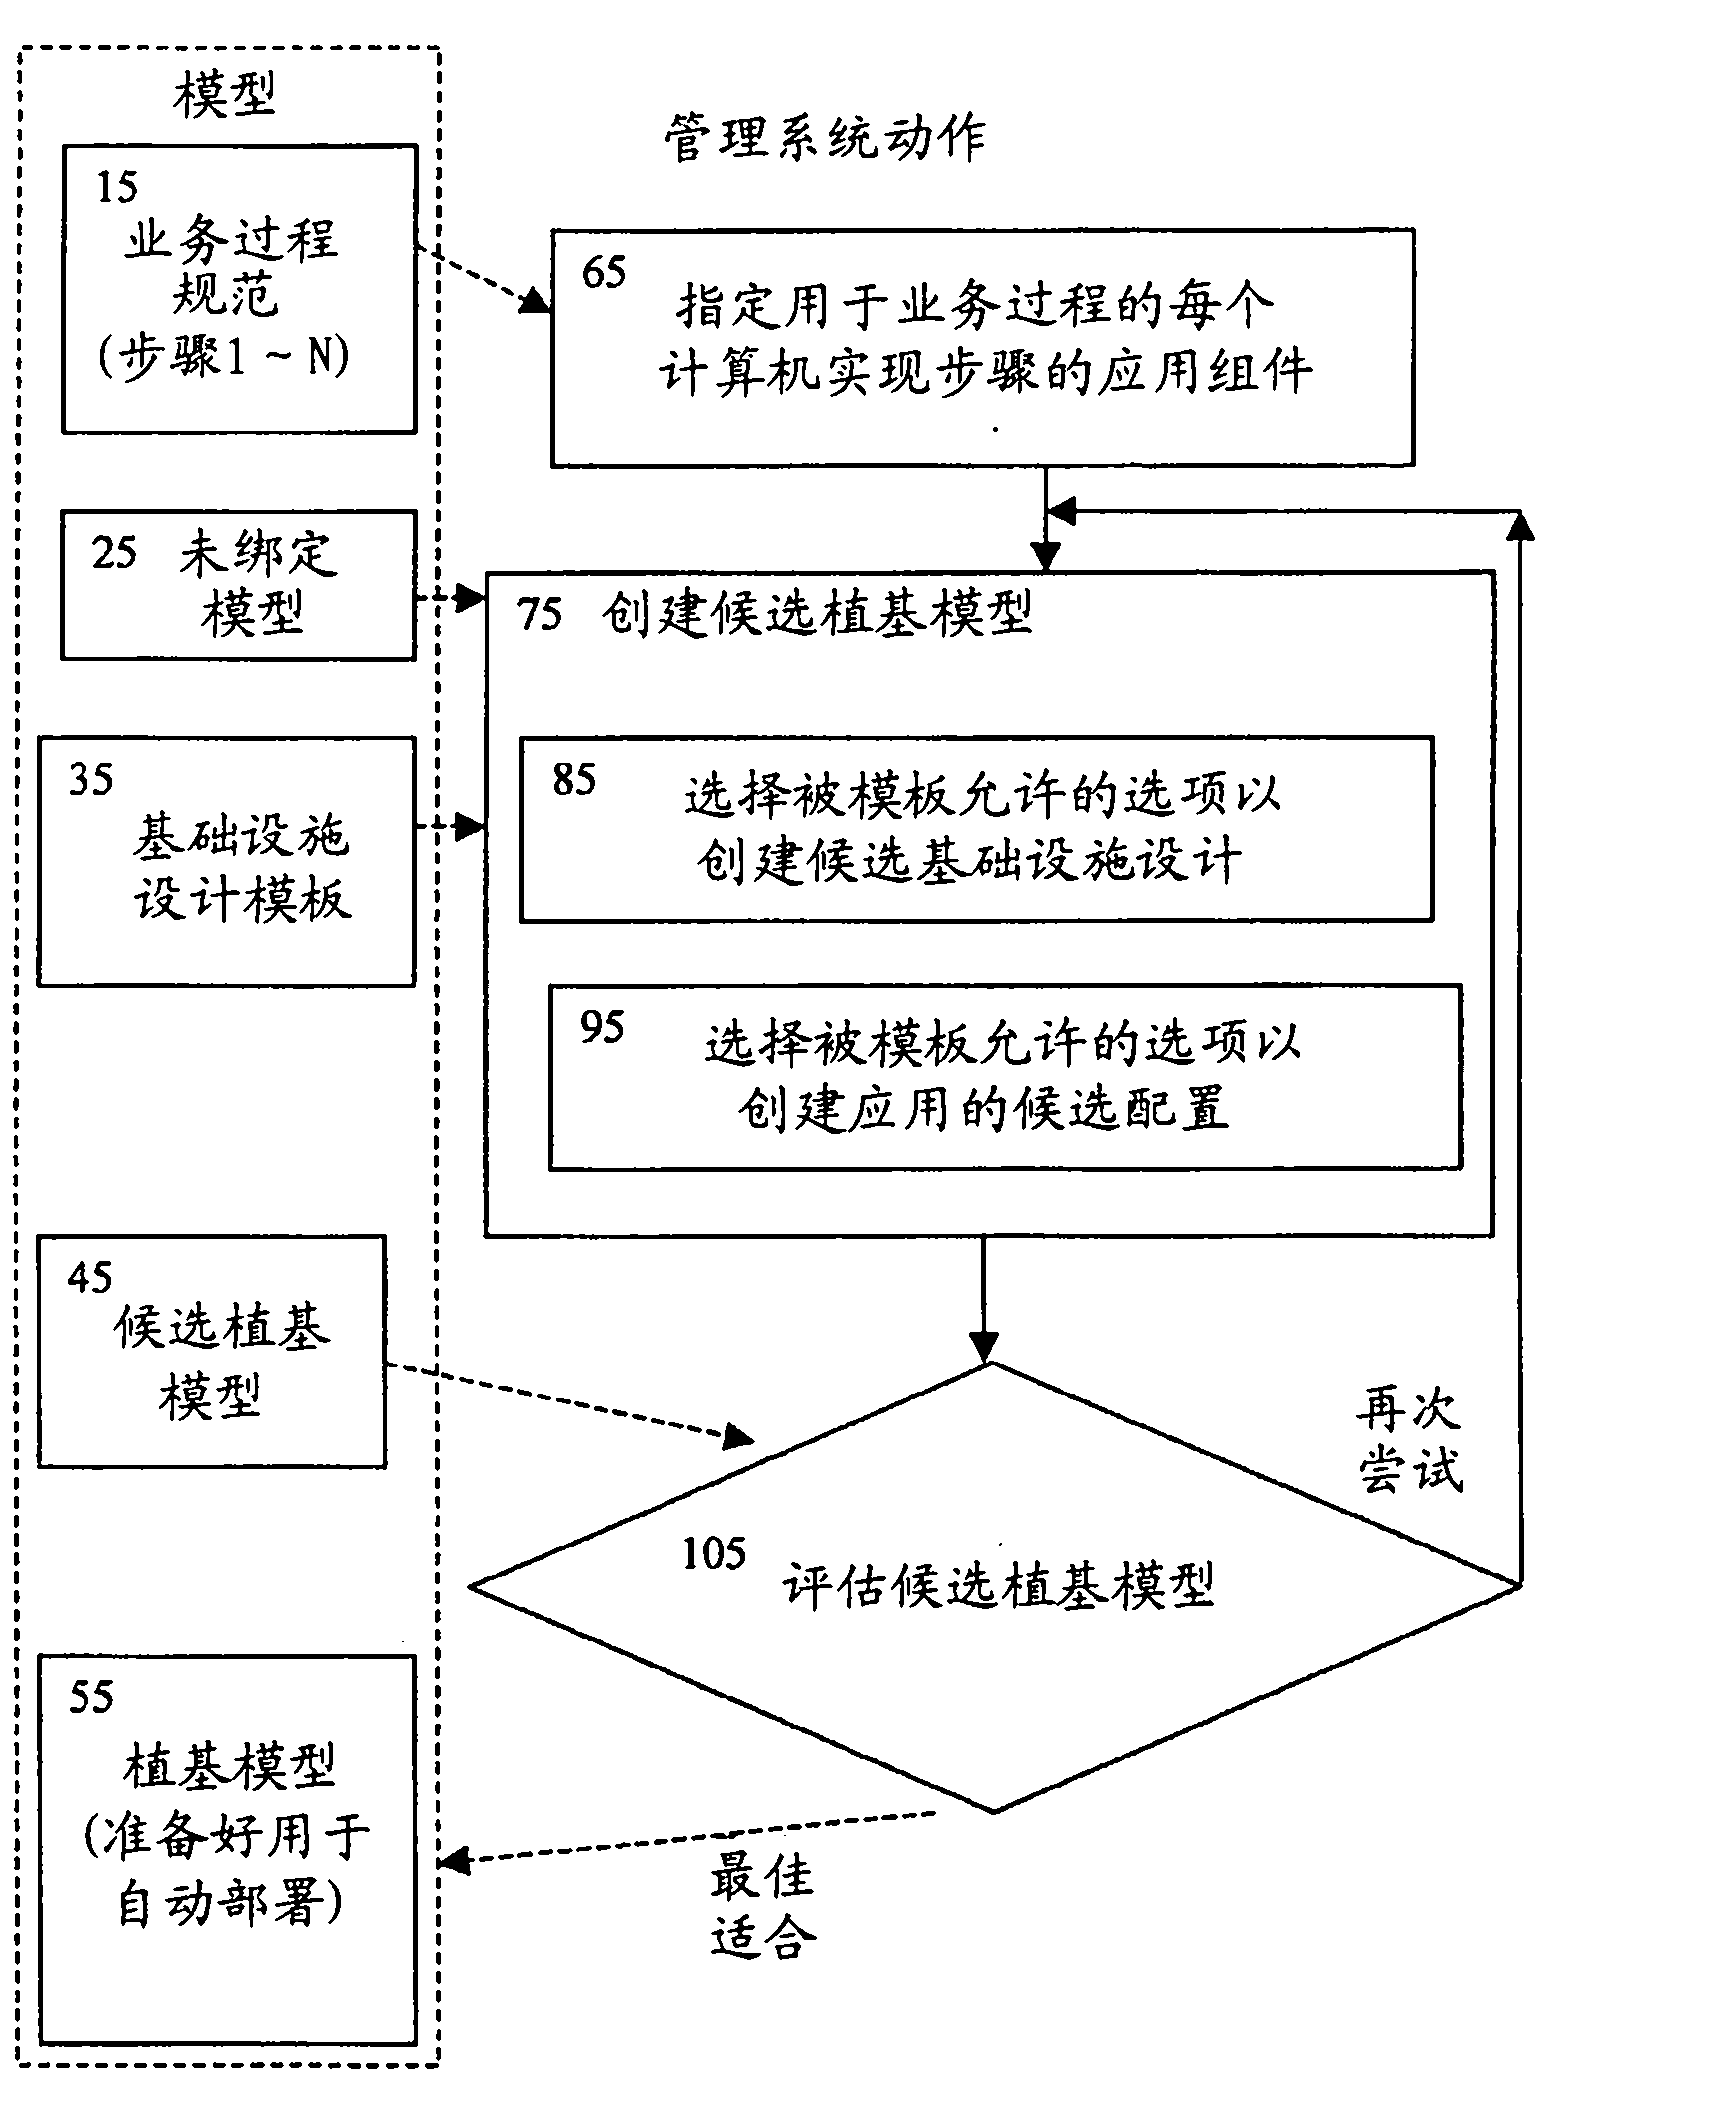 Modelling computer based business process and simulating operation